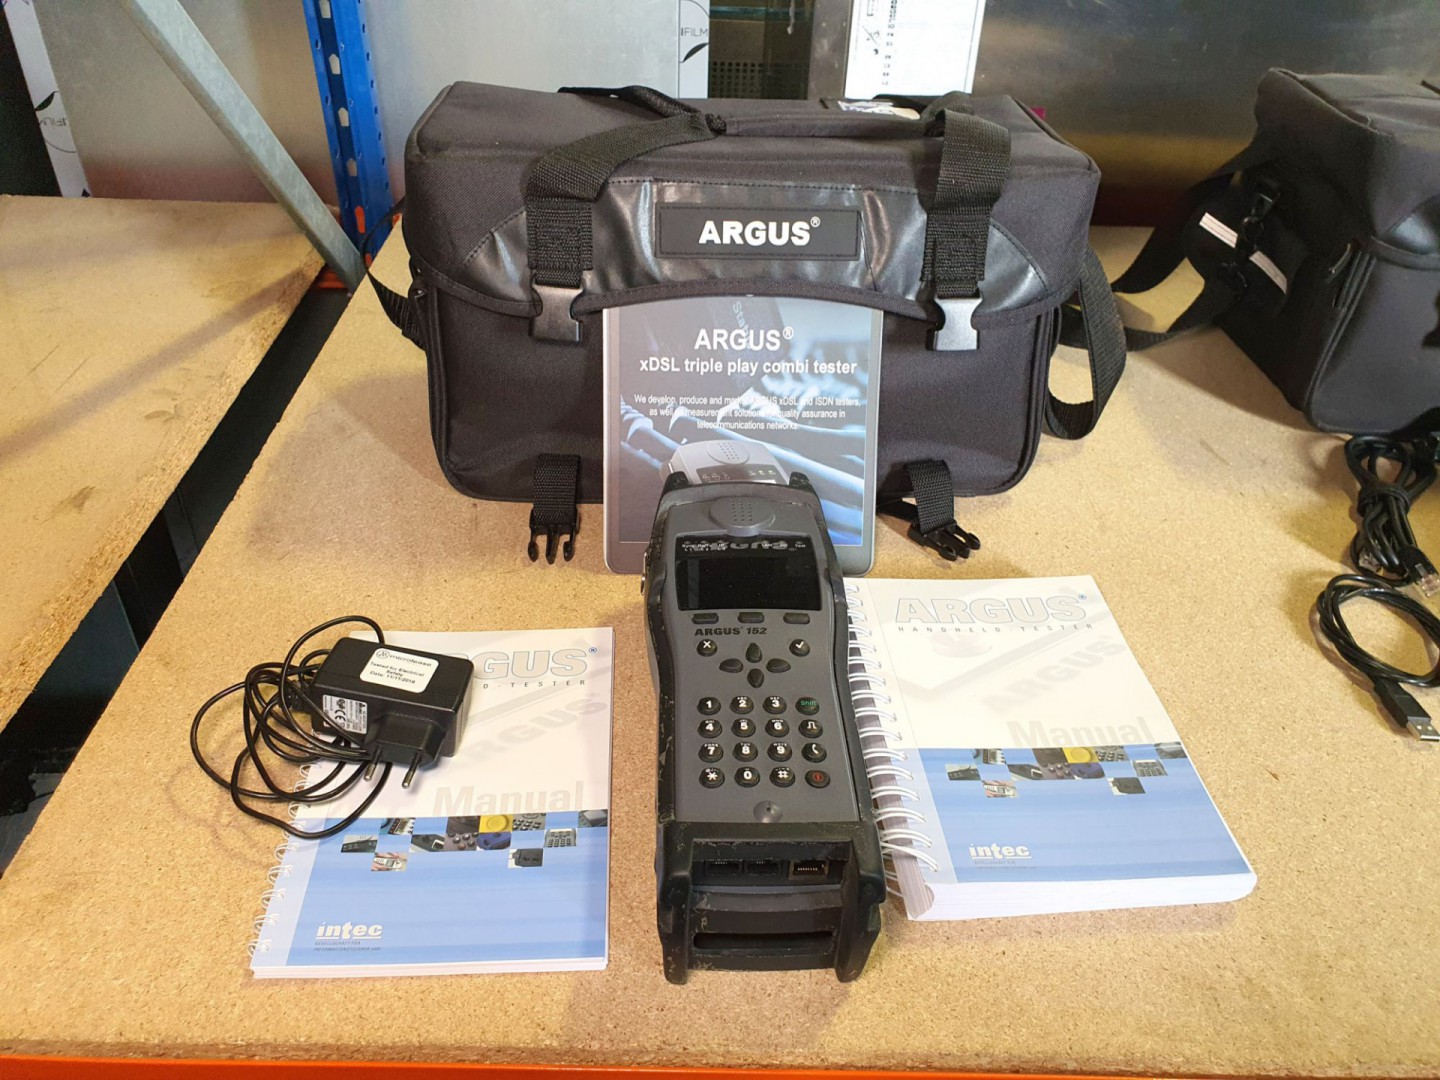 Argus 152 test set with equipment in case